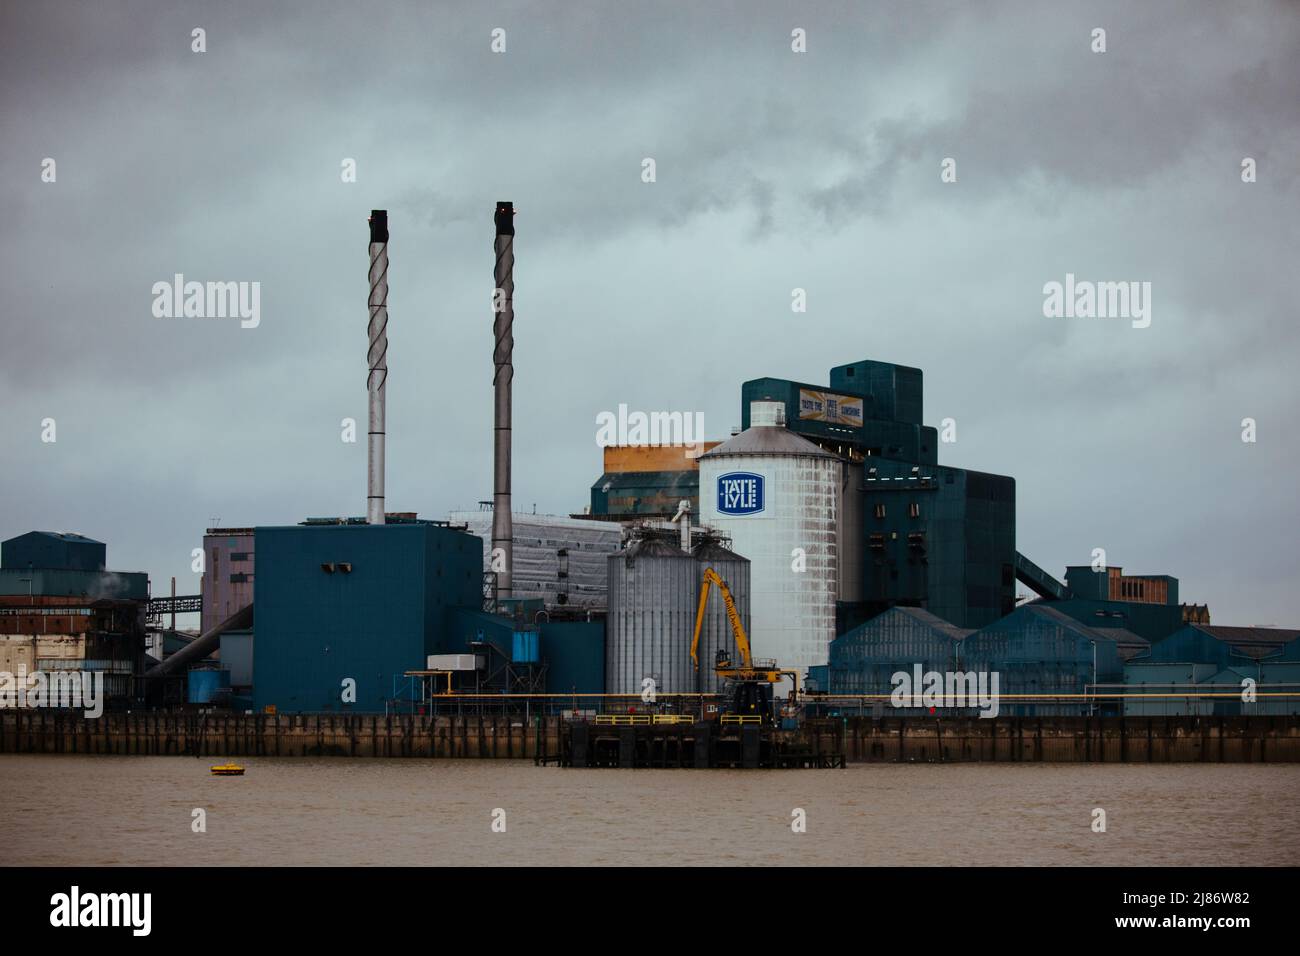 View of the Tate and Lyle Sugars Factory in Newham, taken from Woolwich Stock Photo